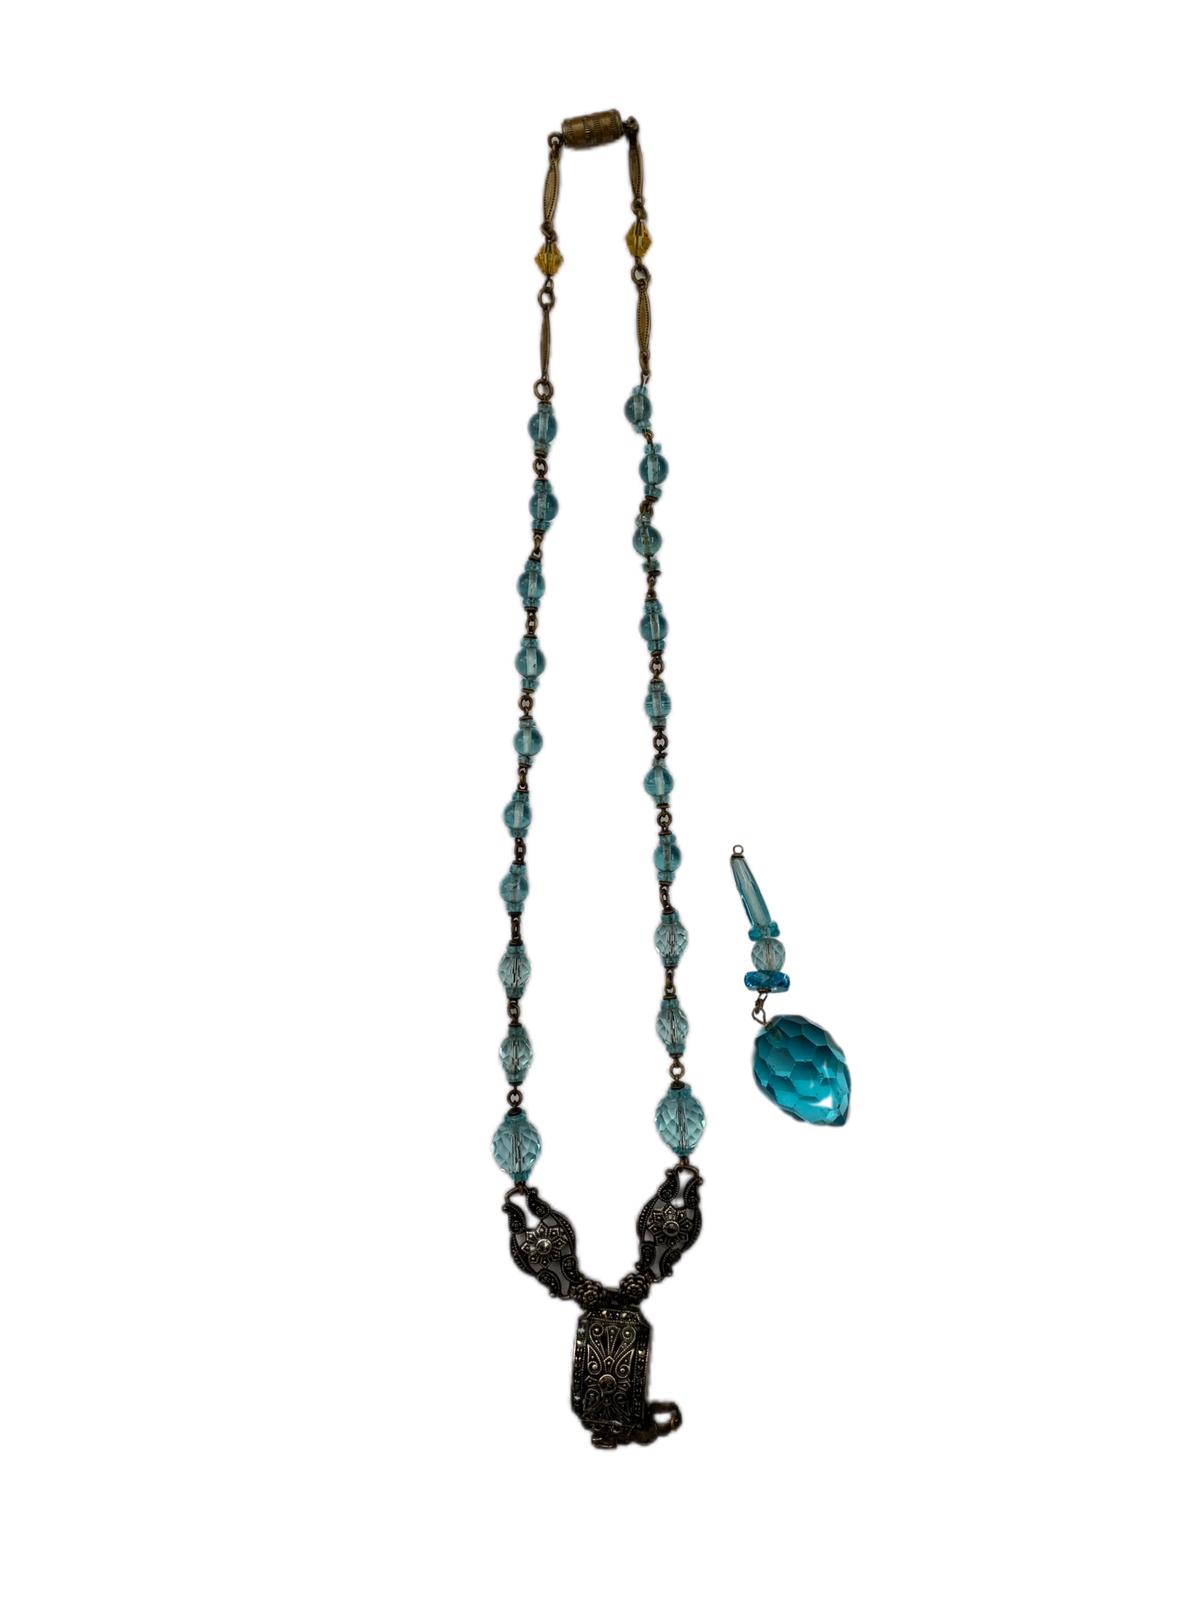 aqua-glass-beads-sterling-necklace